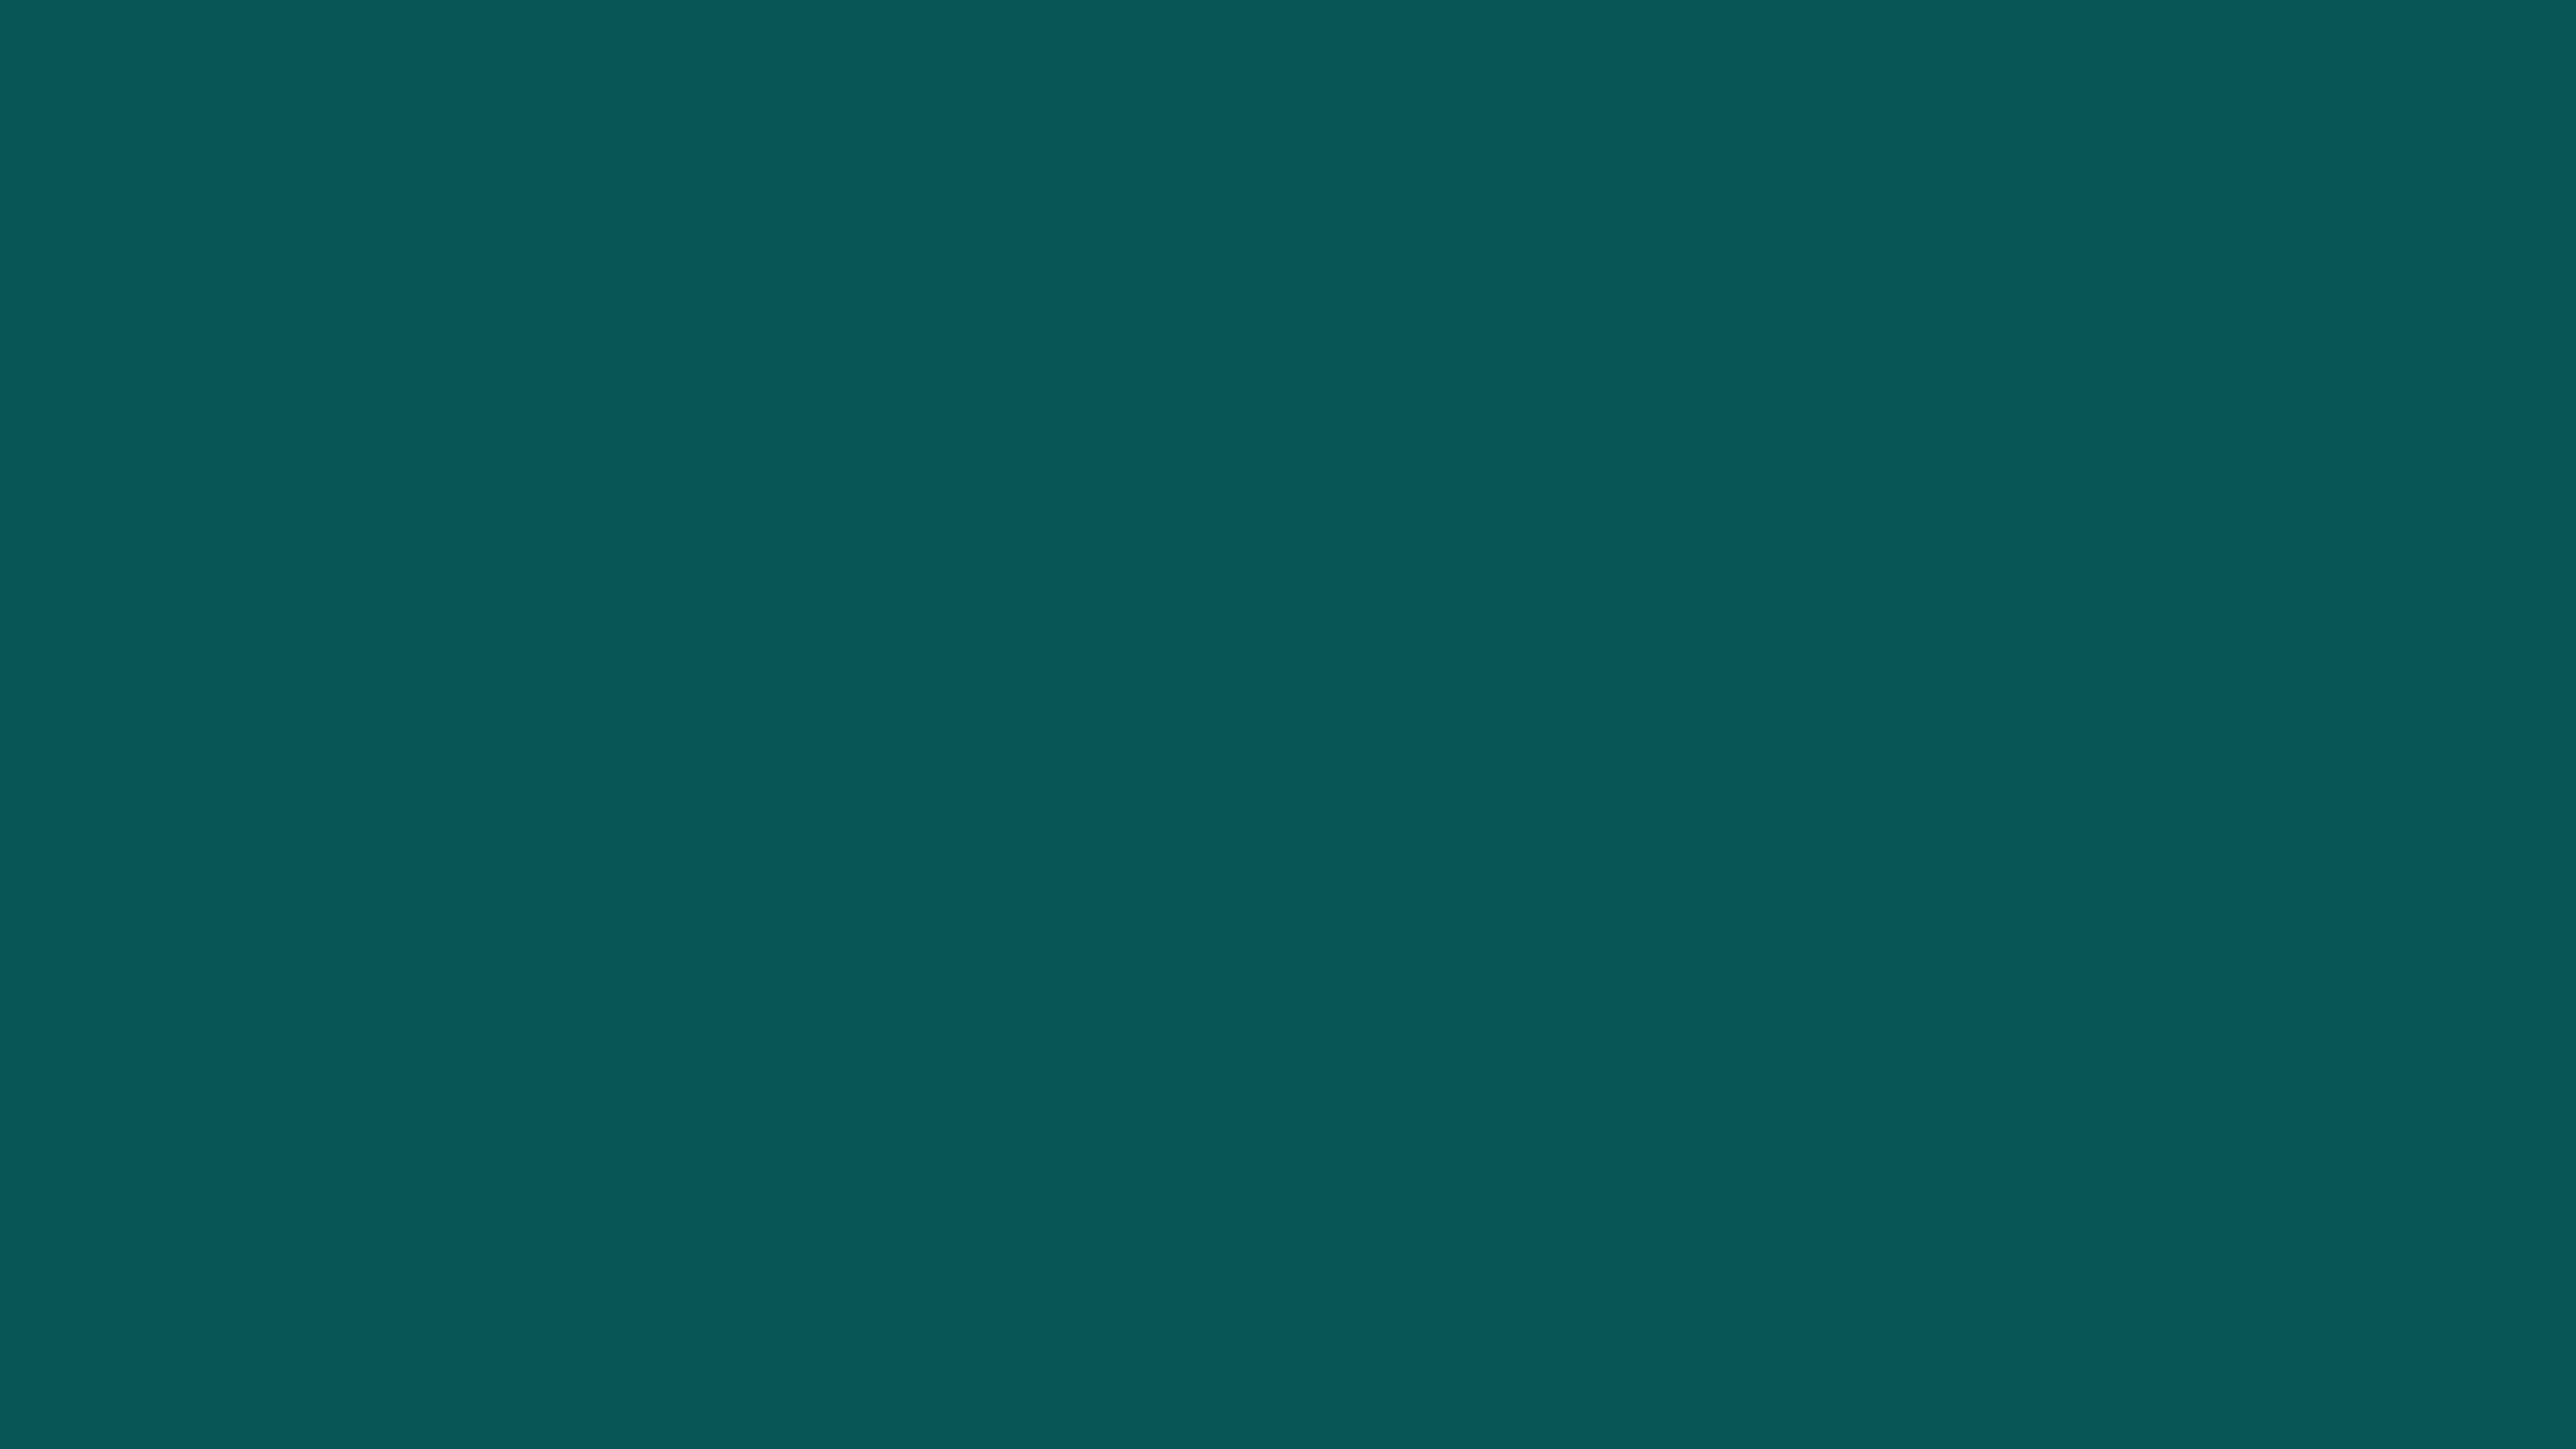 Deep Sea Green Solid Color Background Image | Free Image Generator